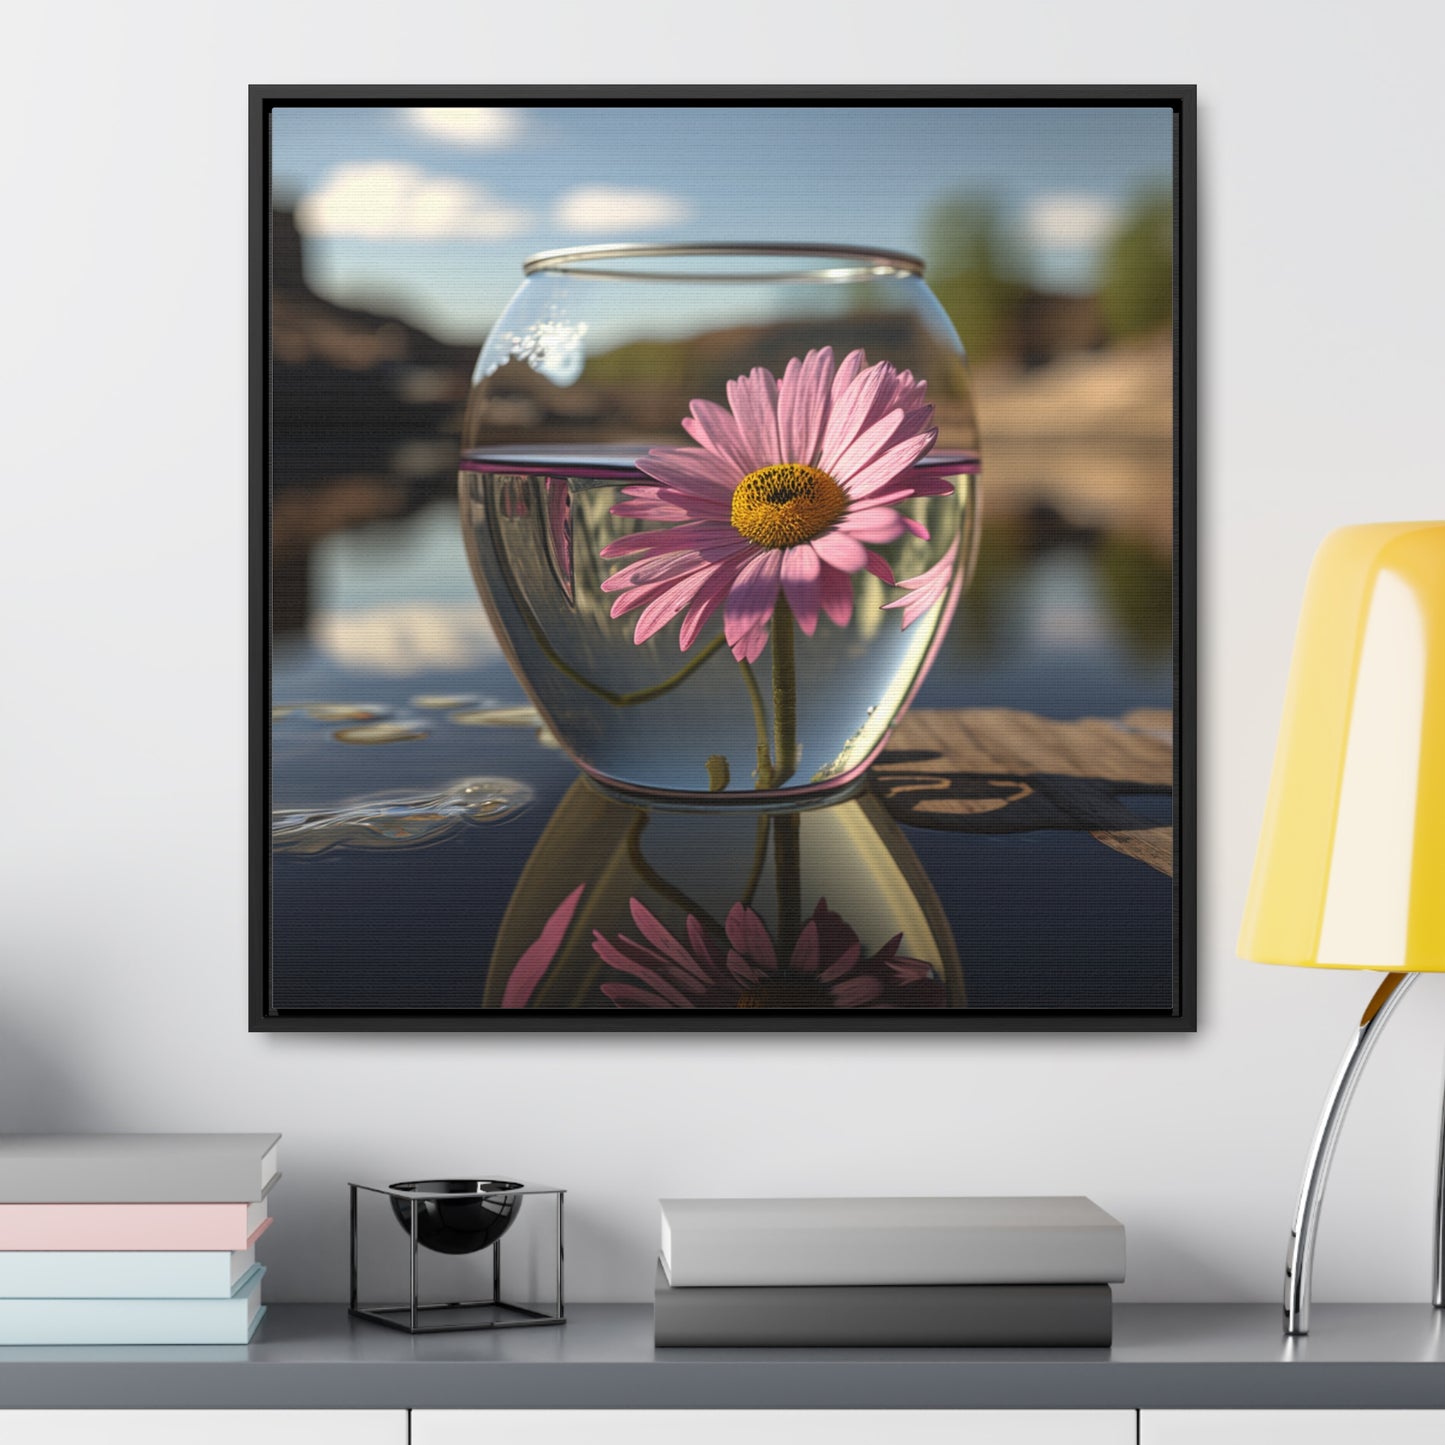 Gallery Canvas Wraps, Square Frame Daisy in a vase 1